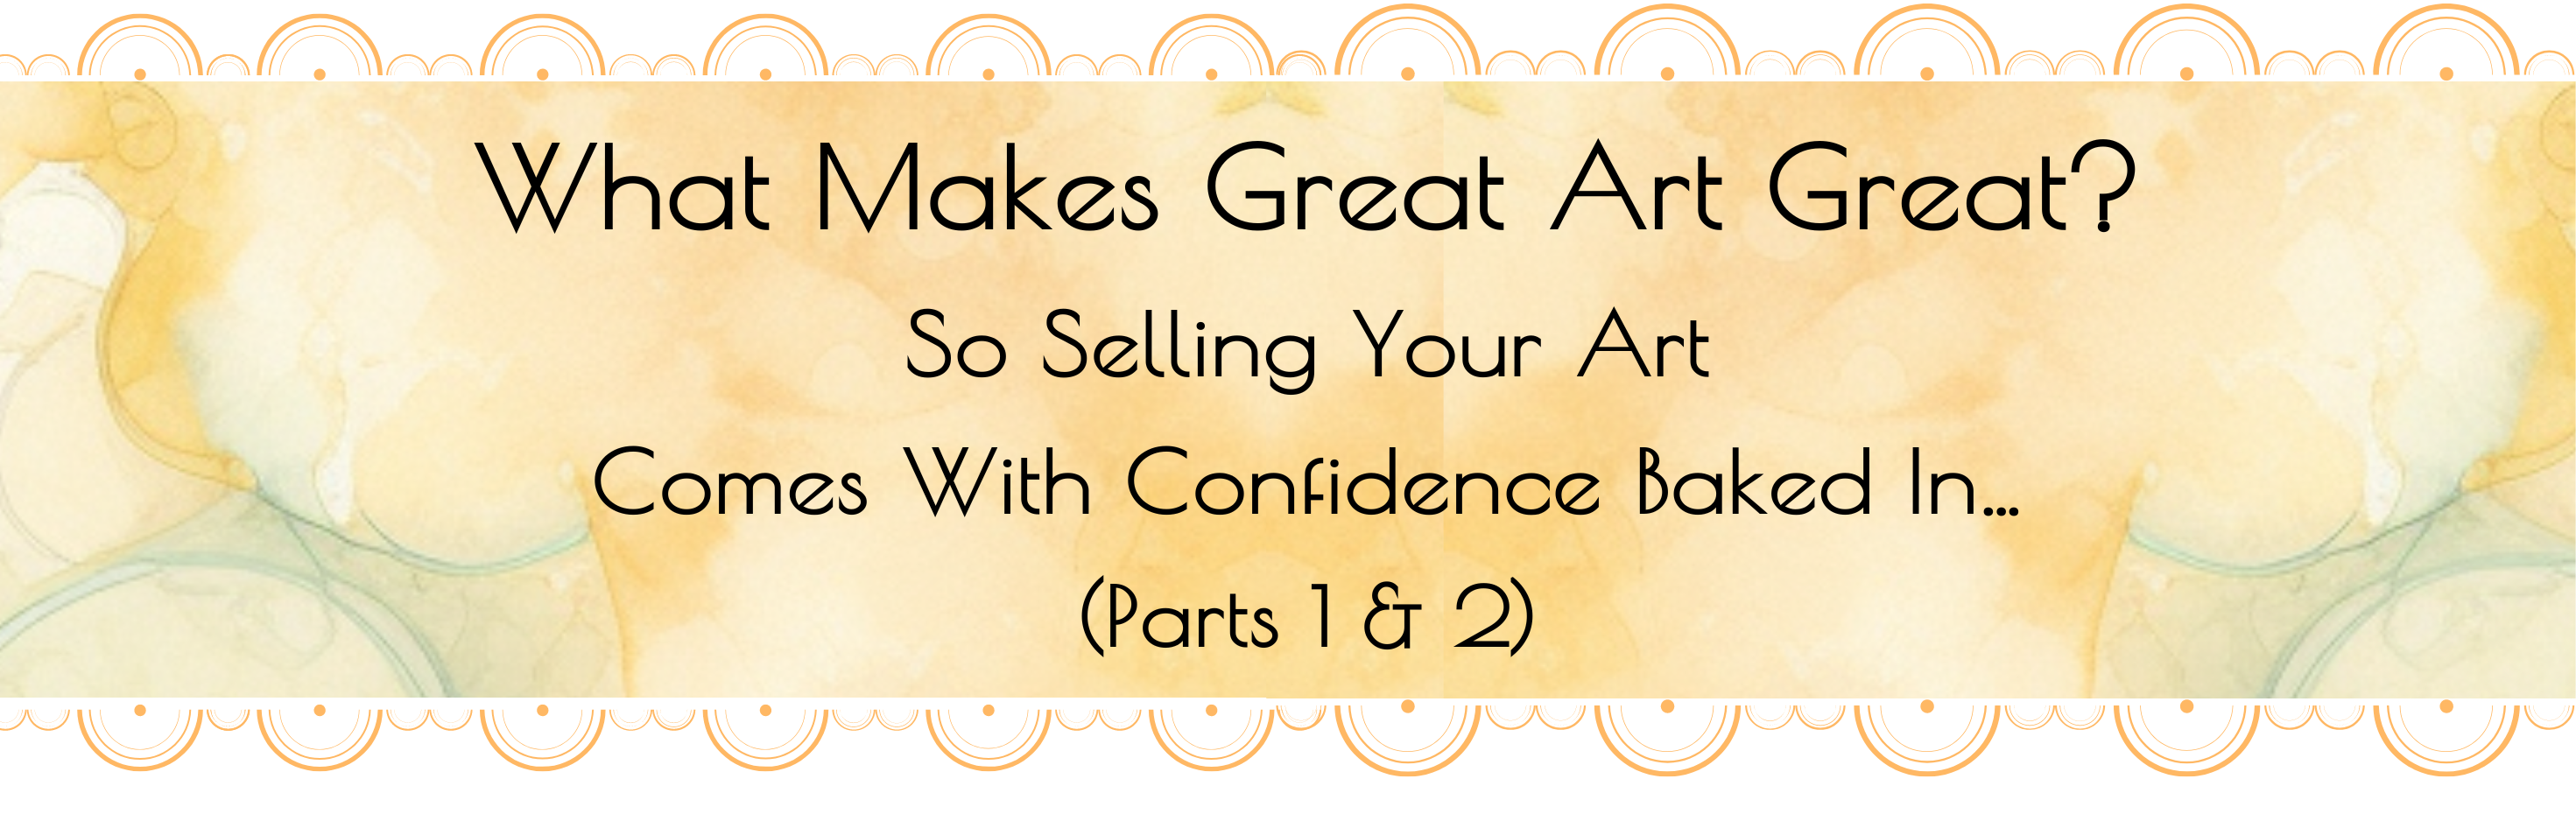 What Makes Great Art Great? So Selling Your Art Comes With Confidence Baked In